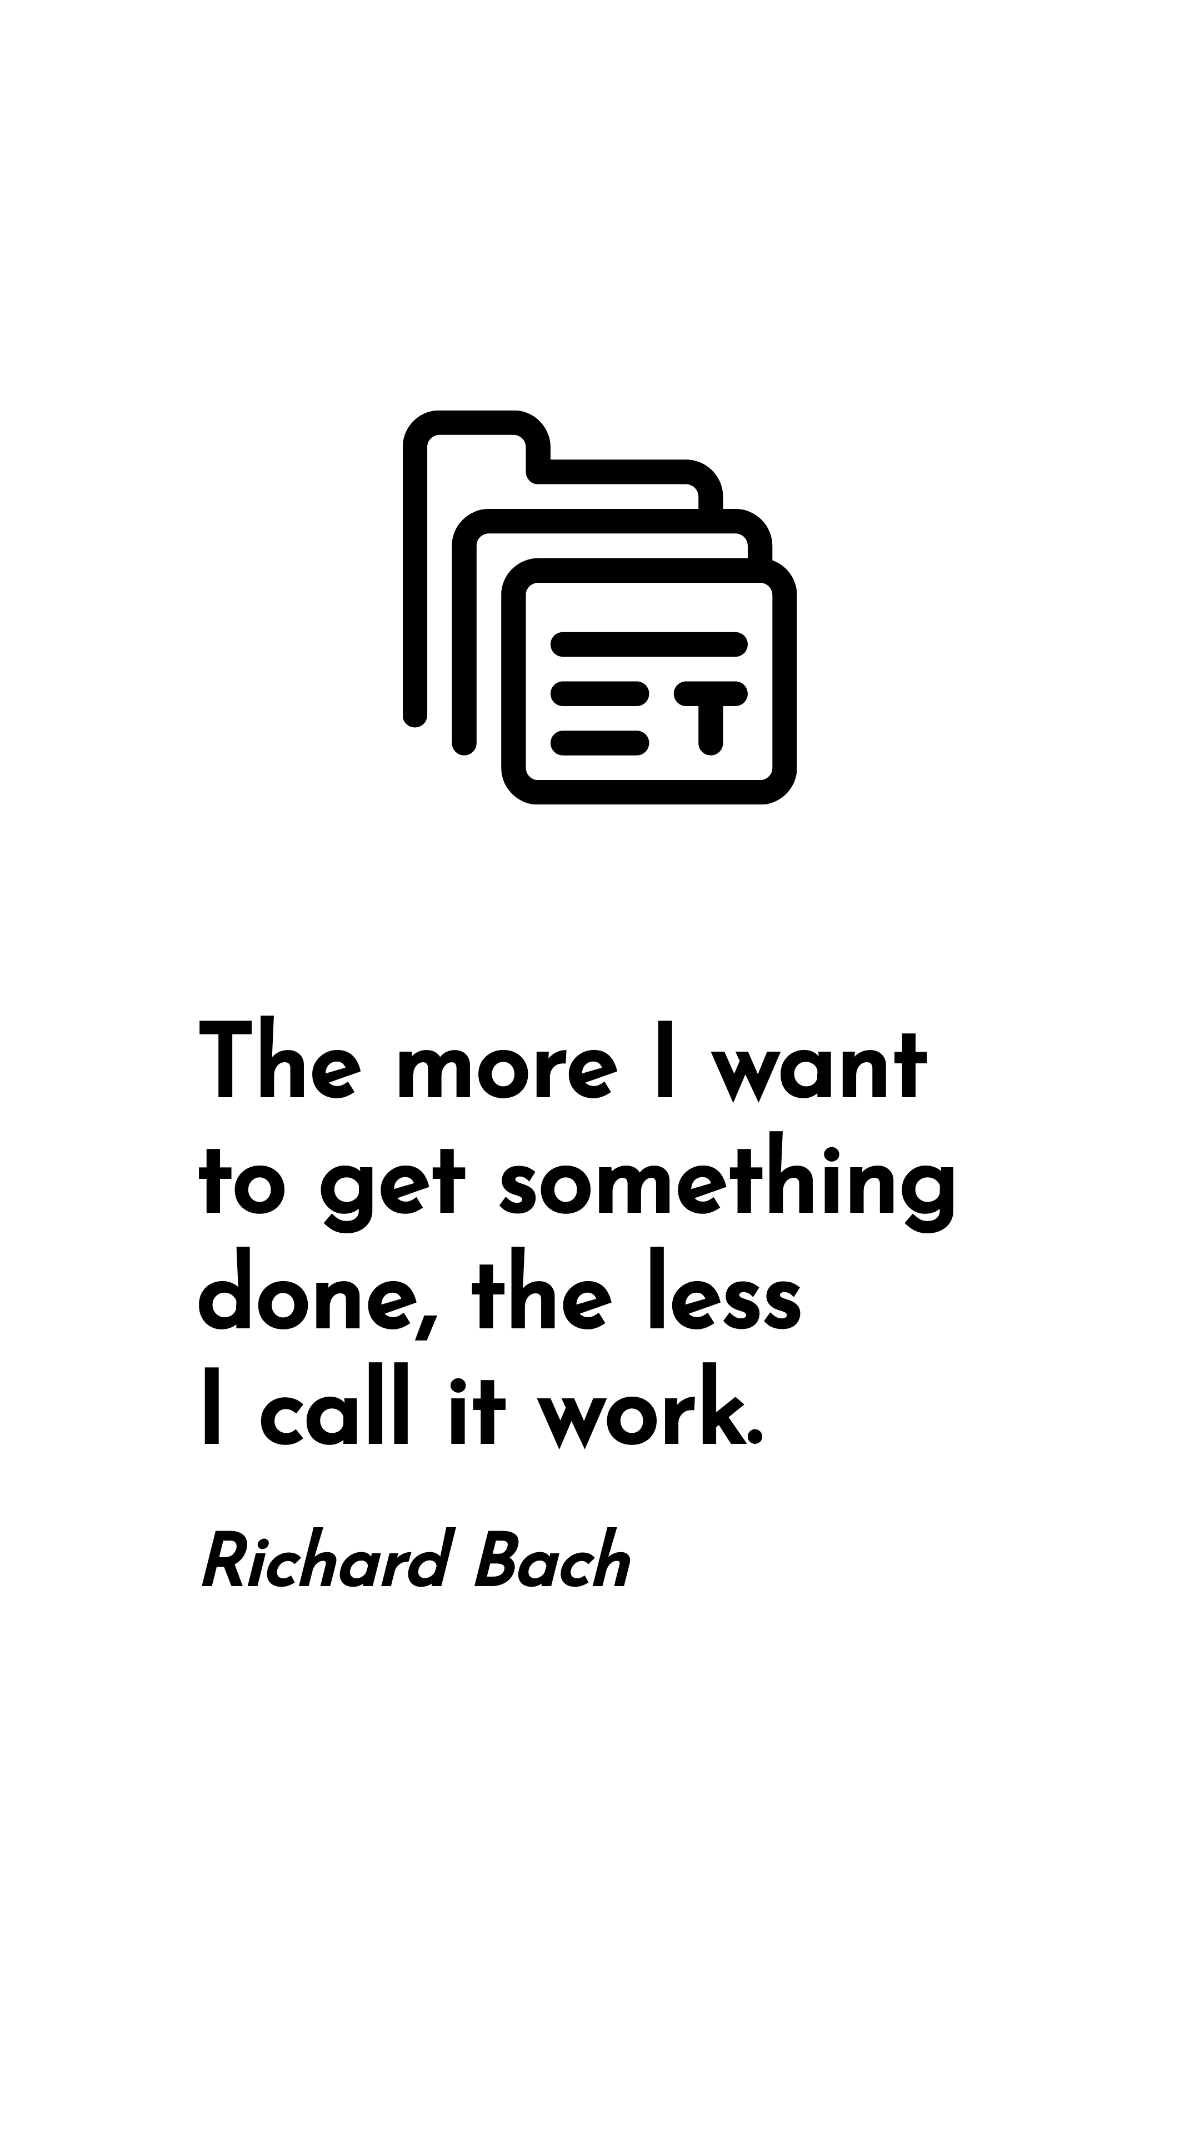 Richard Bach - The more I want to get something done, the less I call it work. Template